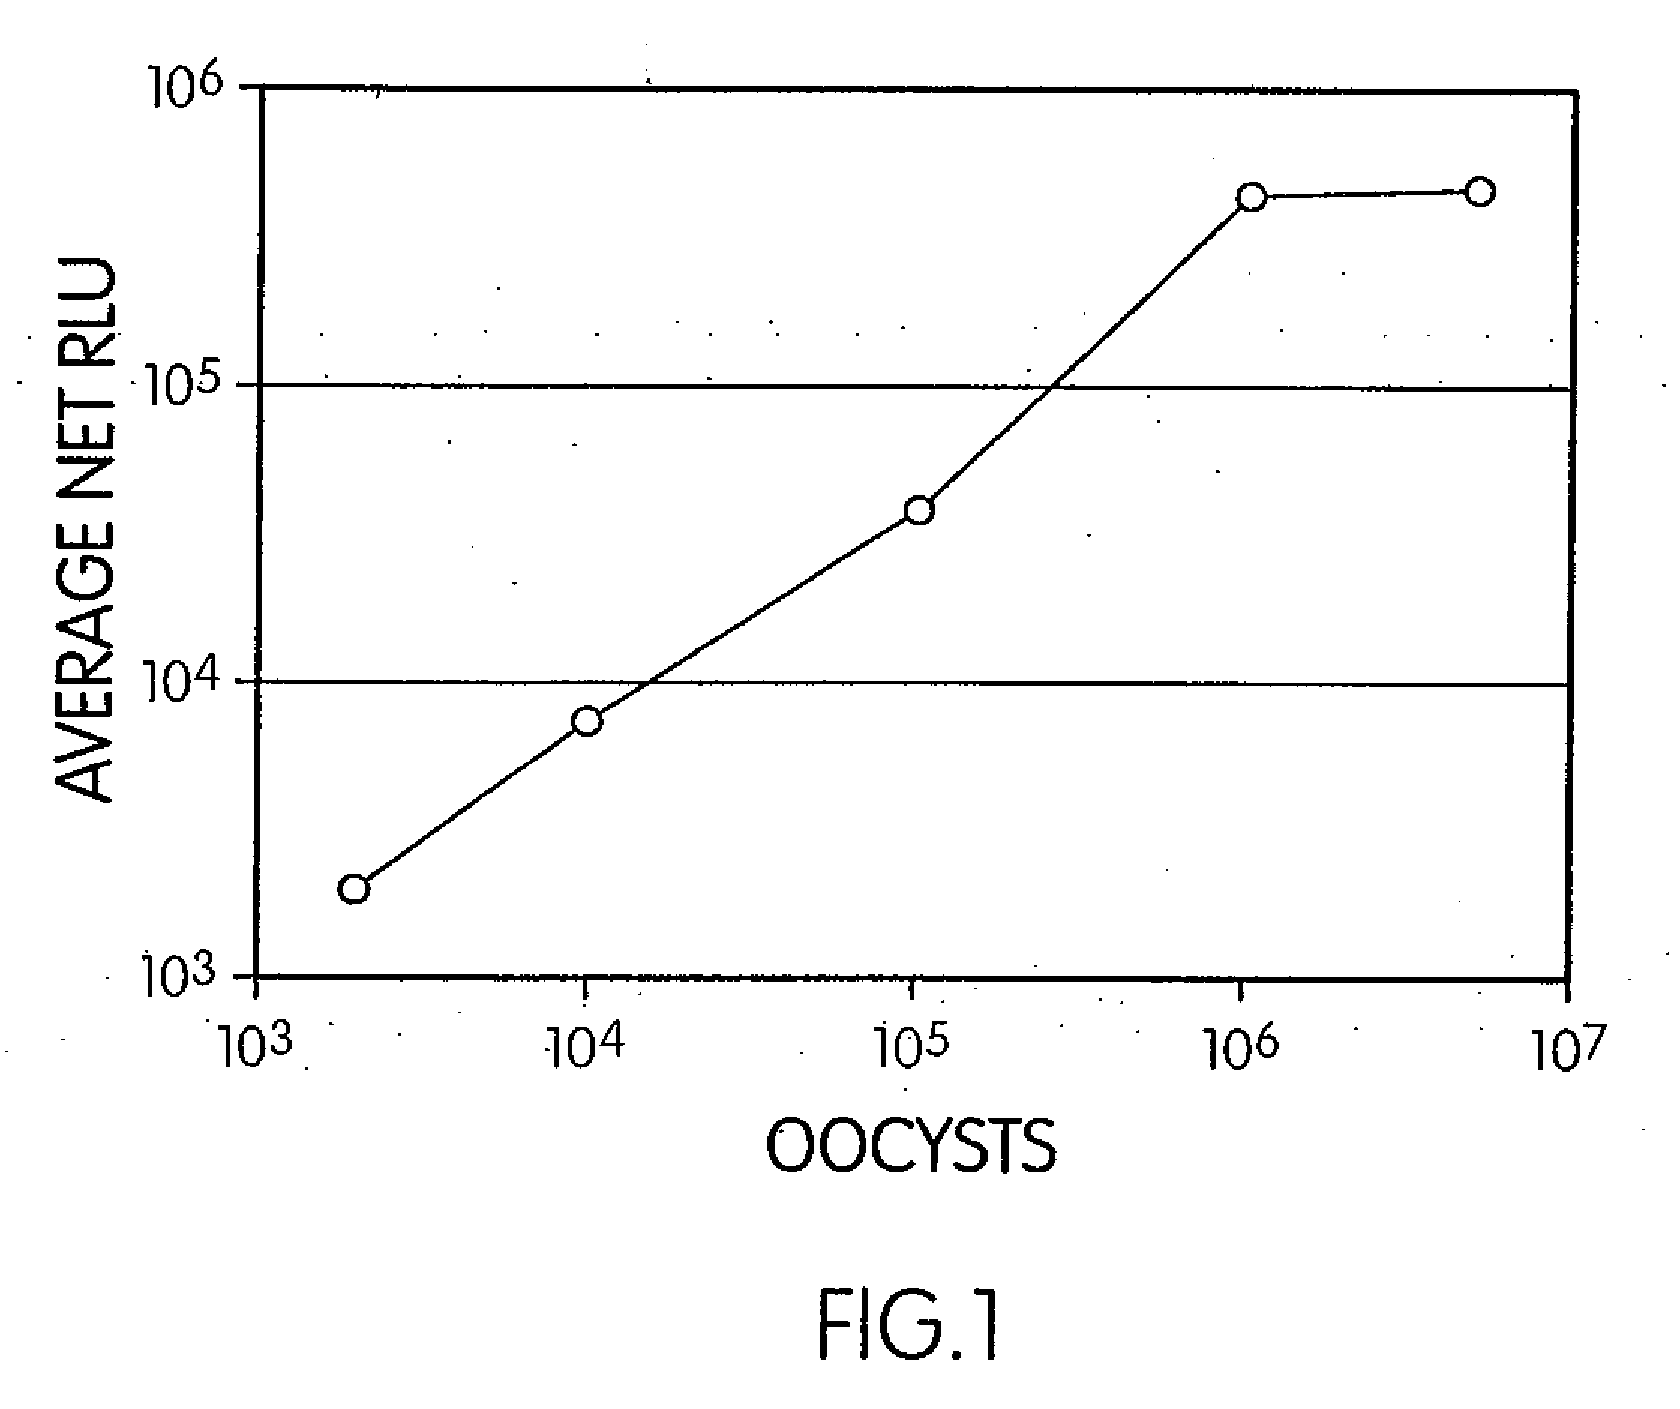 Method for obtaining purified RNA from viable oocysts